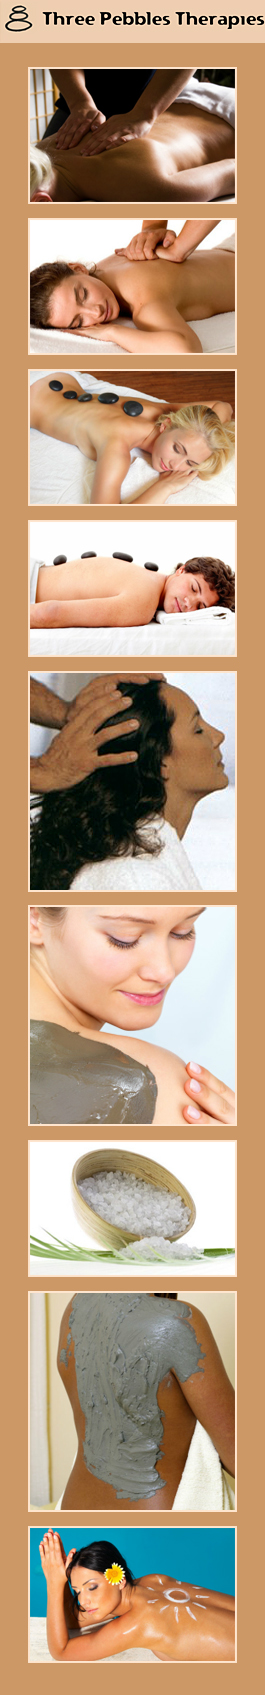 Profile picture for Three Pebbles Therapies